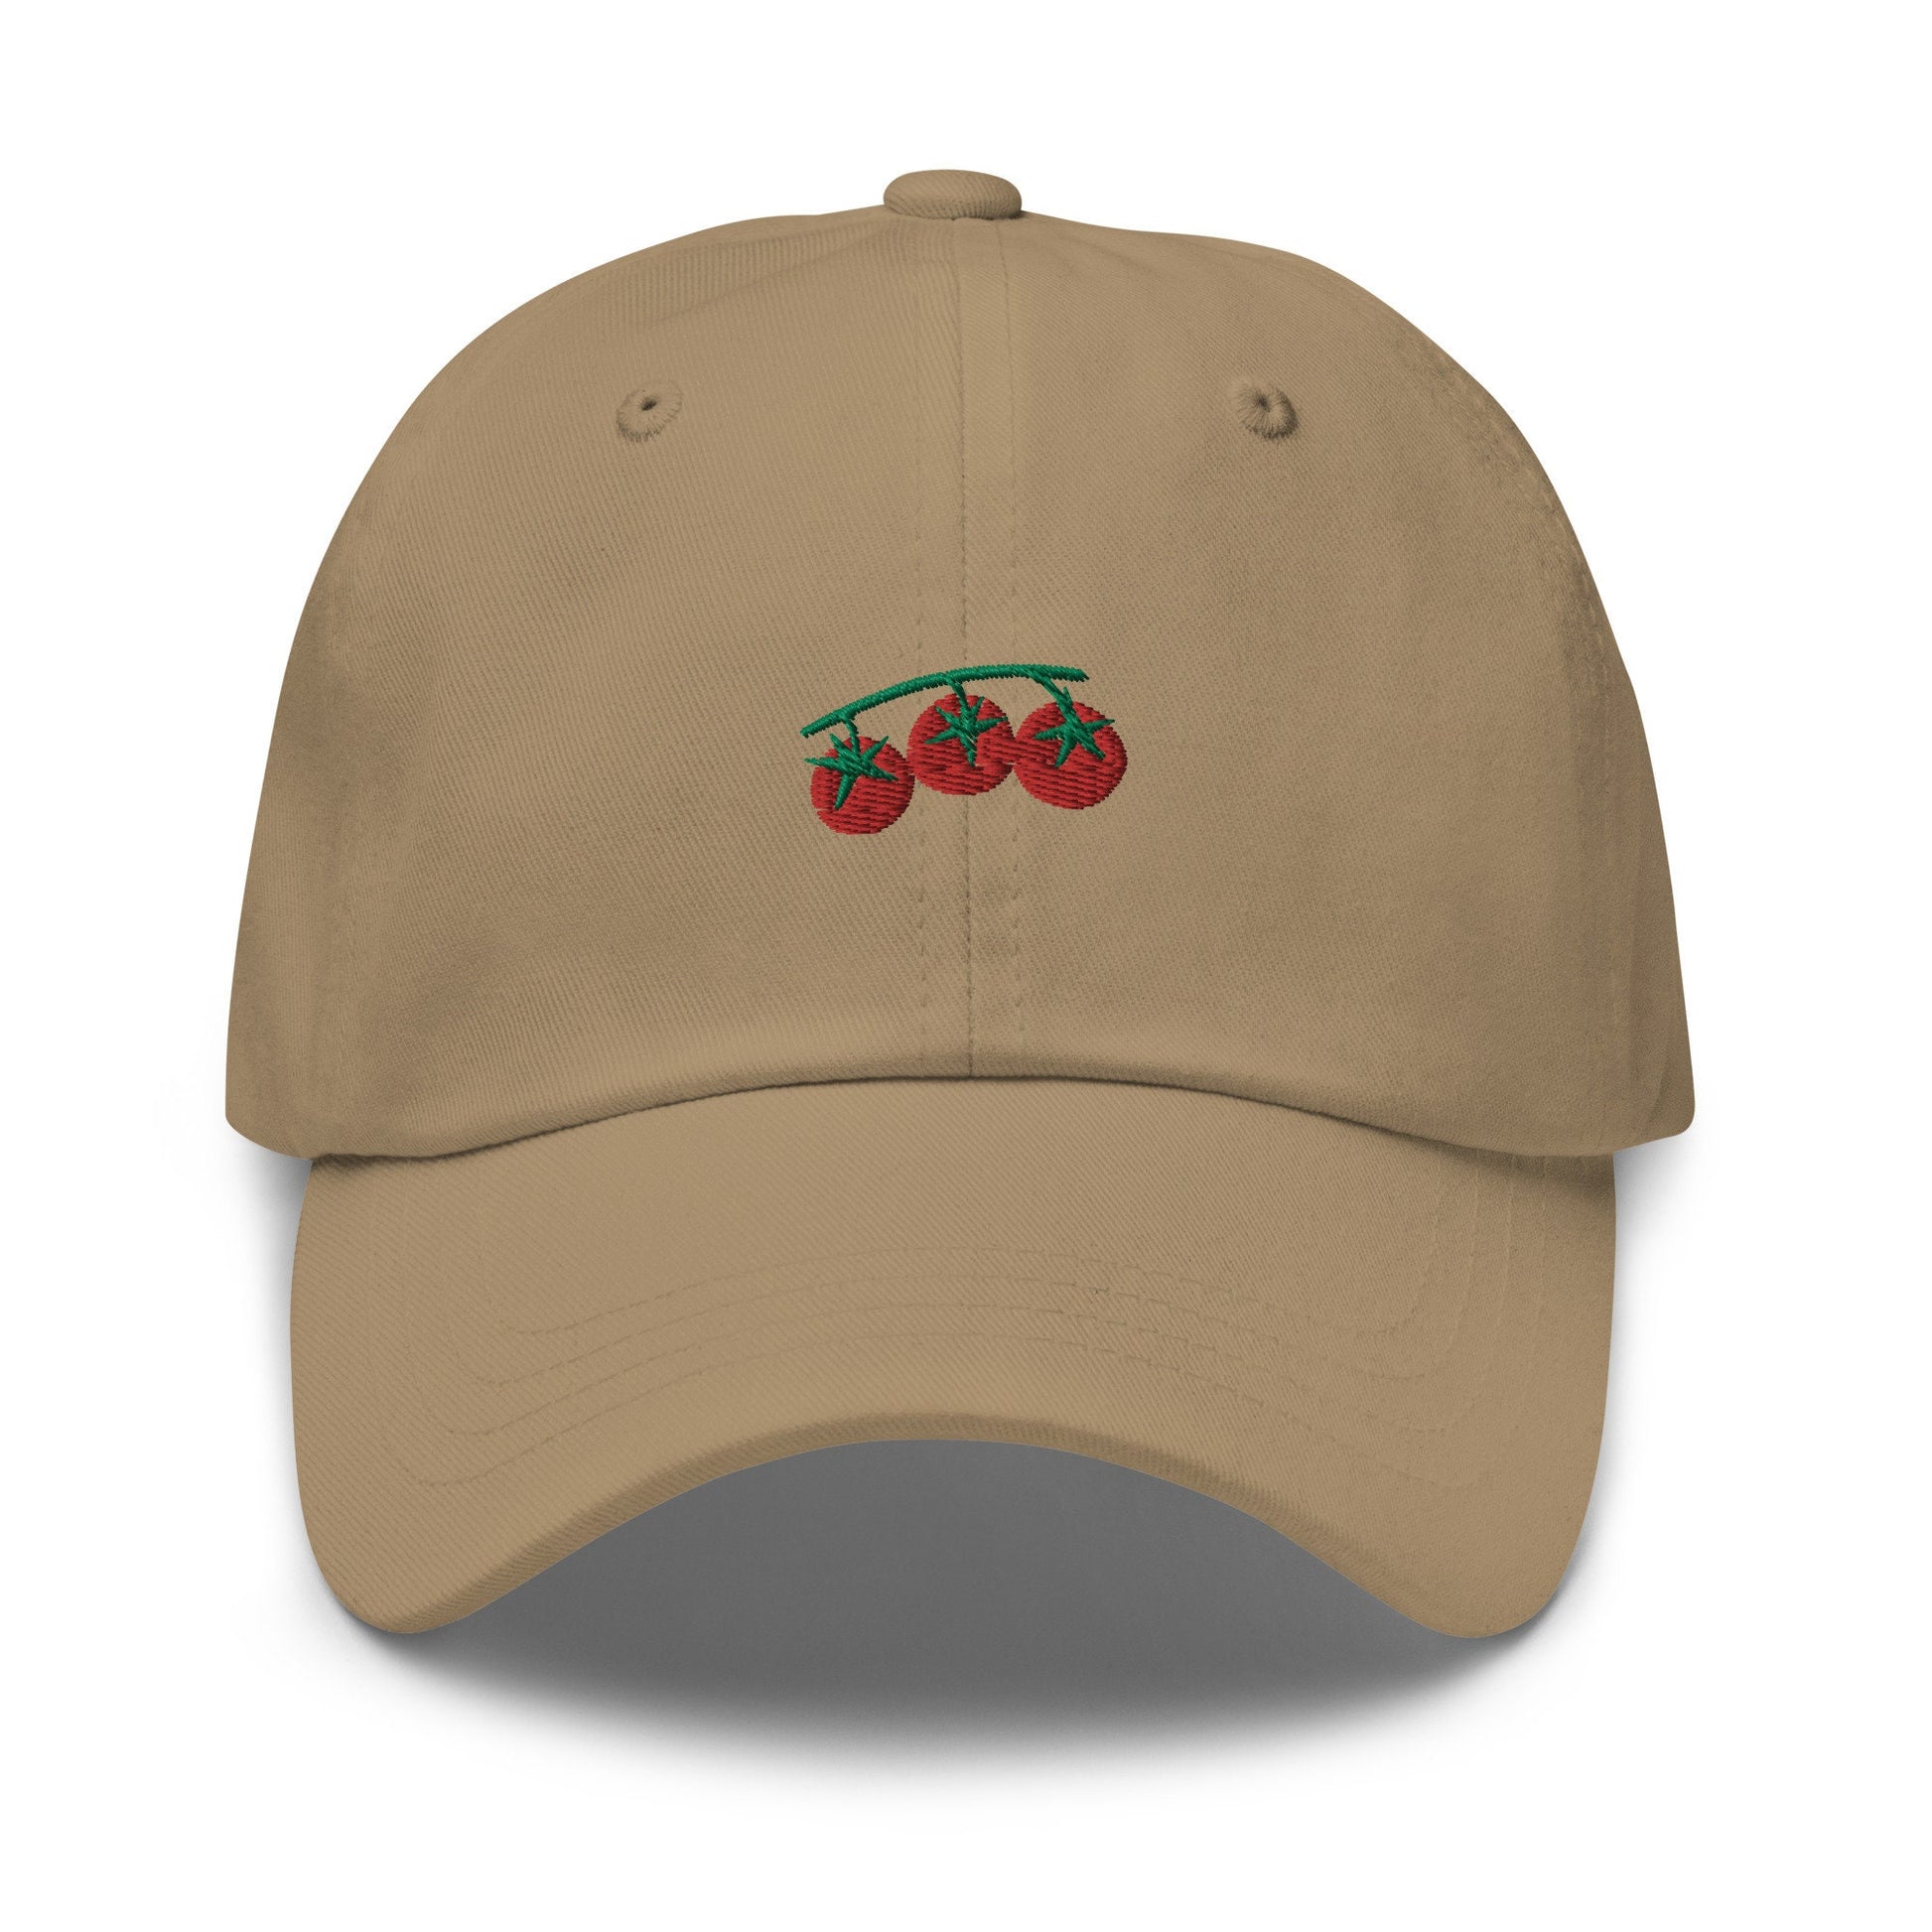 Tomato Vine Dad Hat - Italian Food Lovers - Tomato Gift - Cotton Embroidered Cap - Multiple Colors